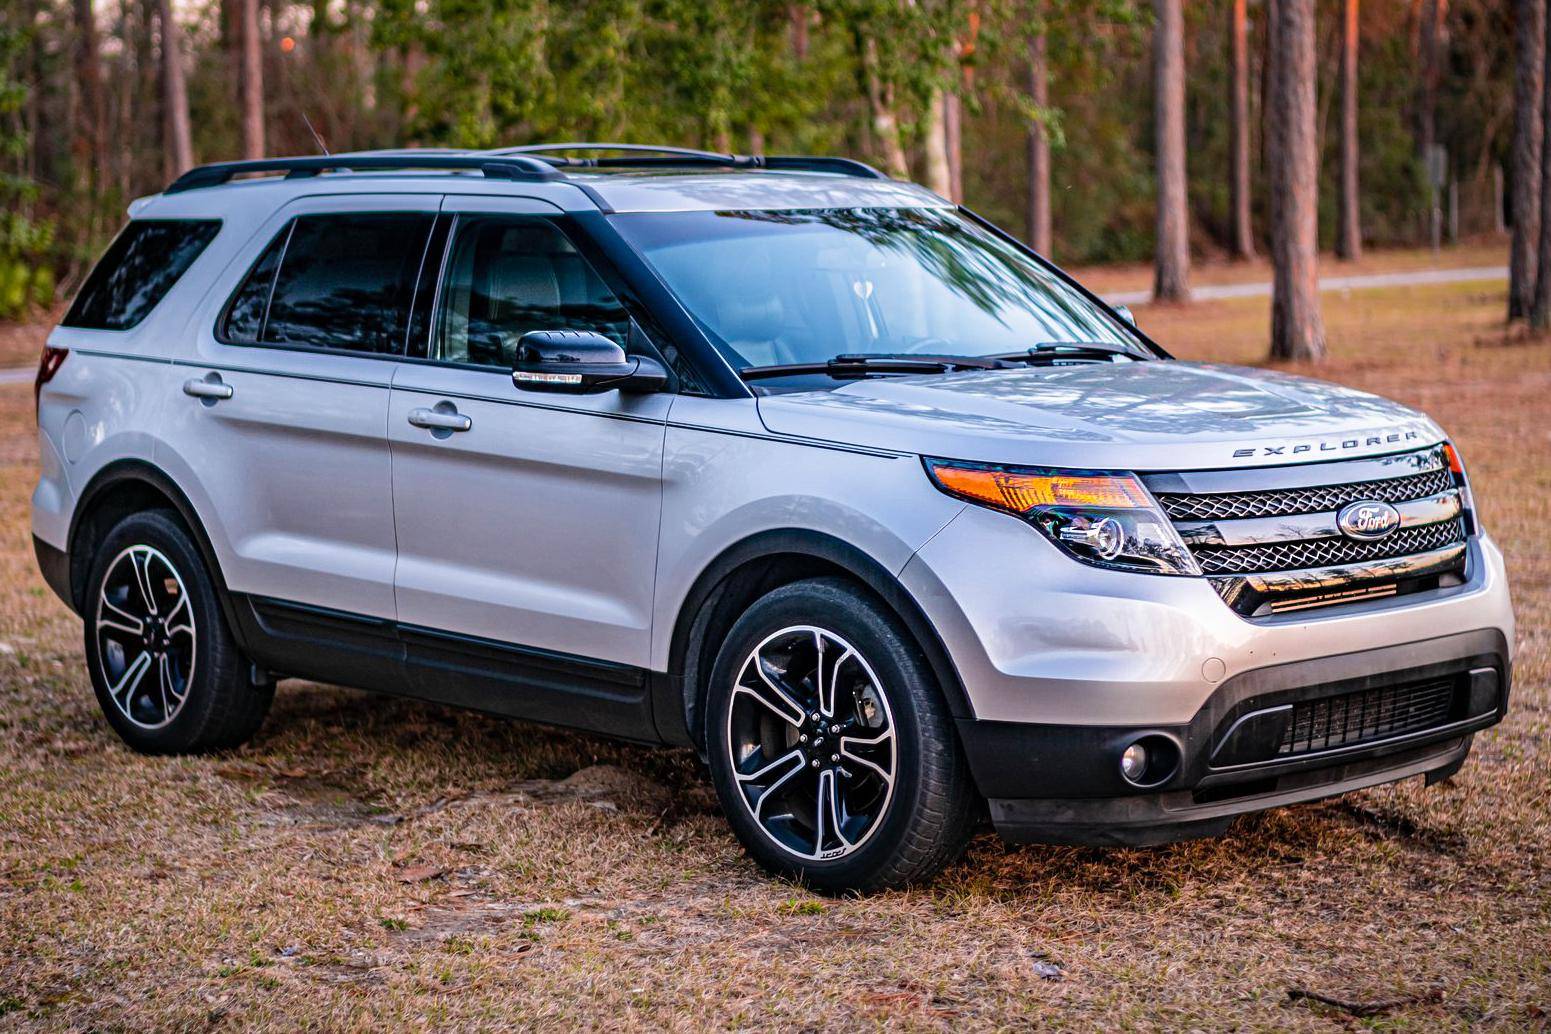 2015 Ford Explorer Xlt  : Discover the Power within